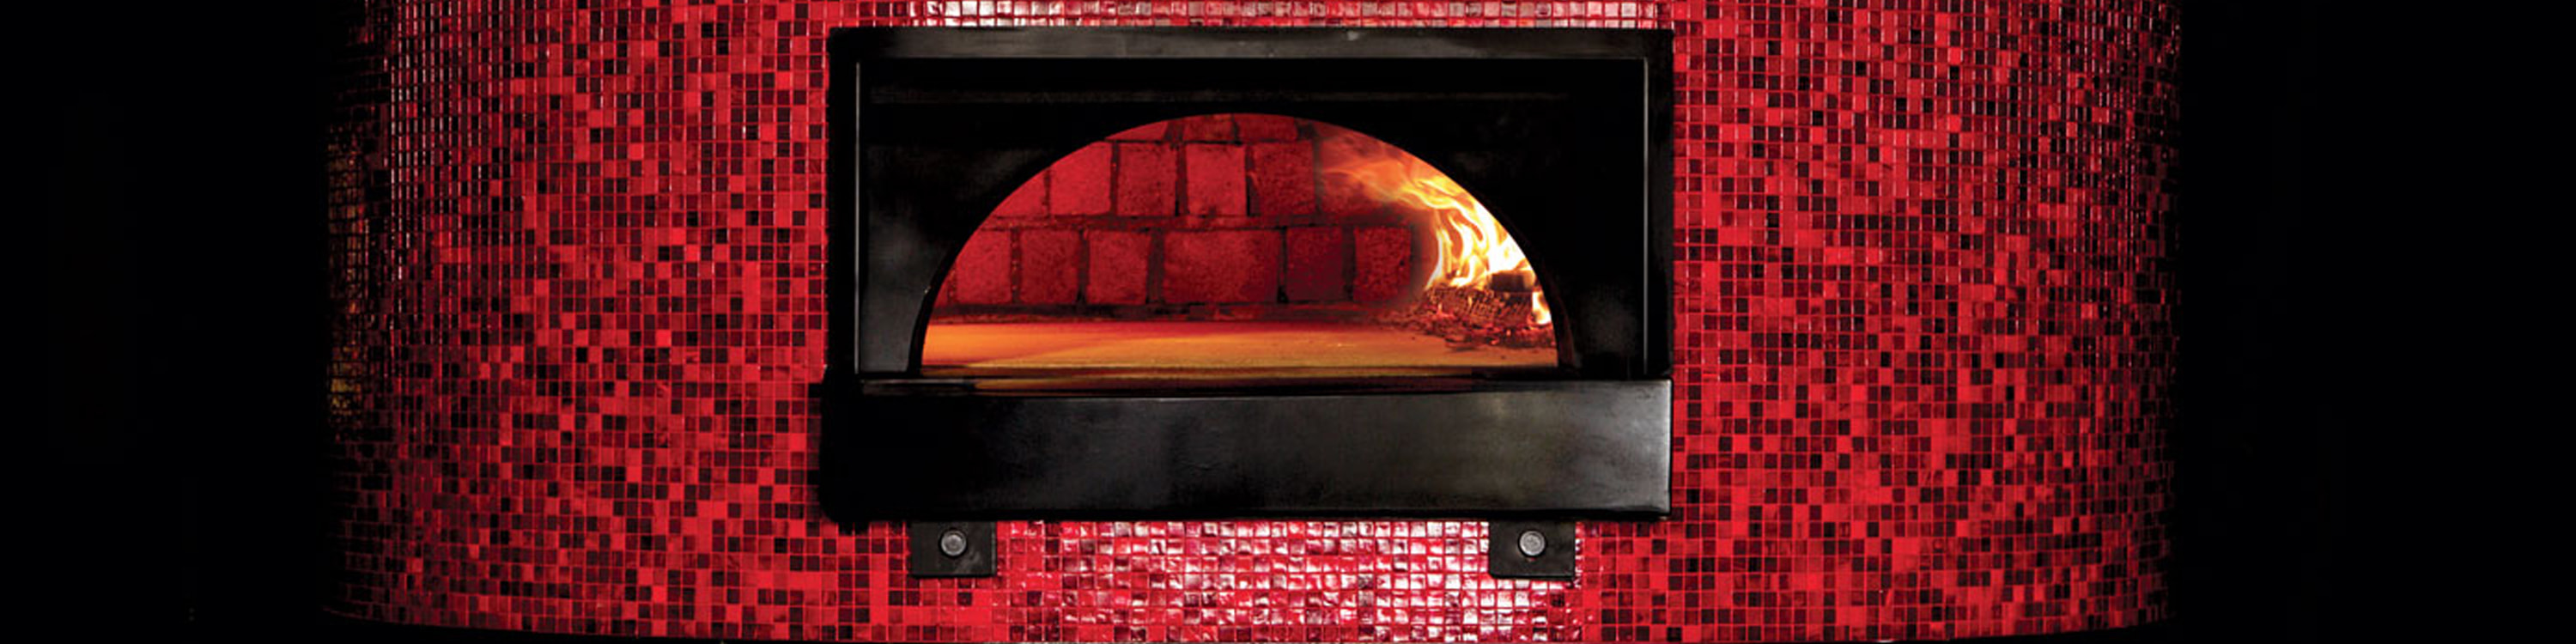 the flame in a wood fired commercial pizza oven